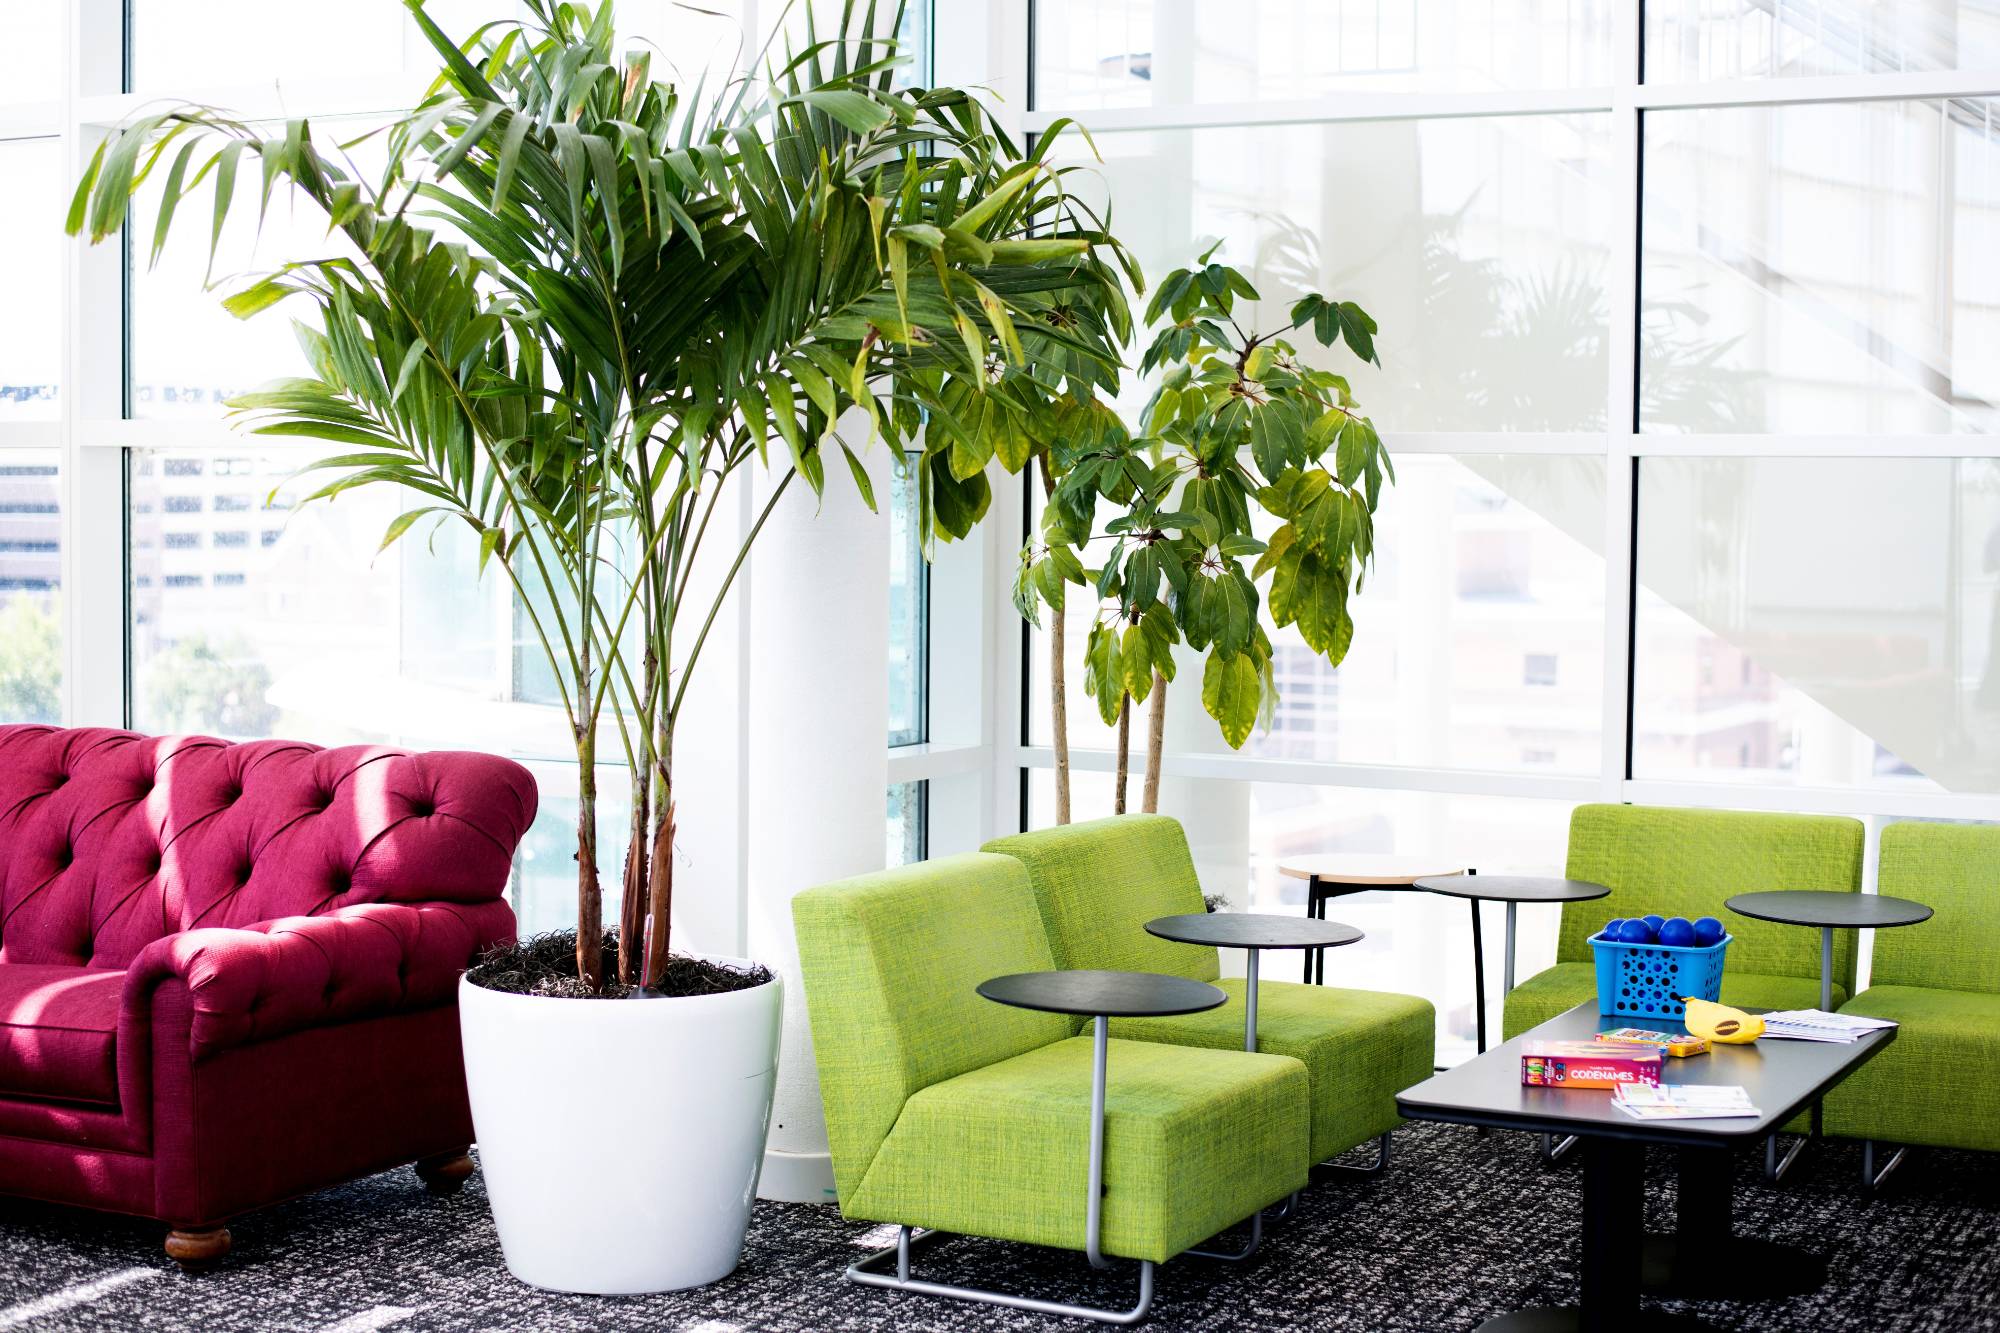 Image of burgundy couch and green chairs with a palm tree plan in the middle at the Reset Room.